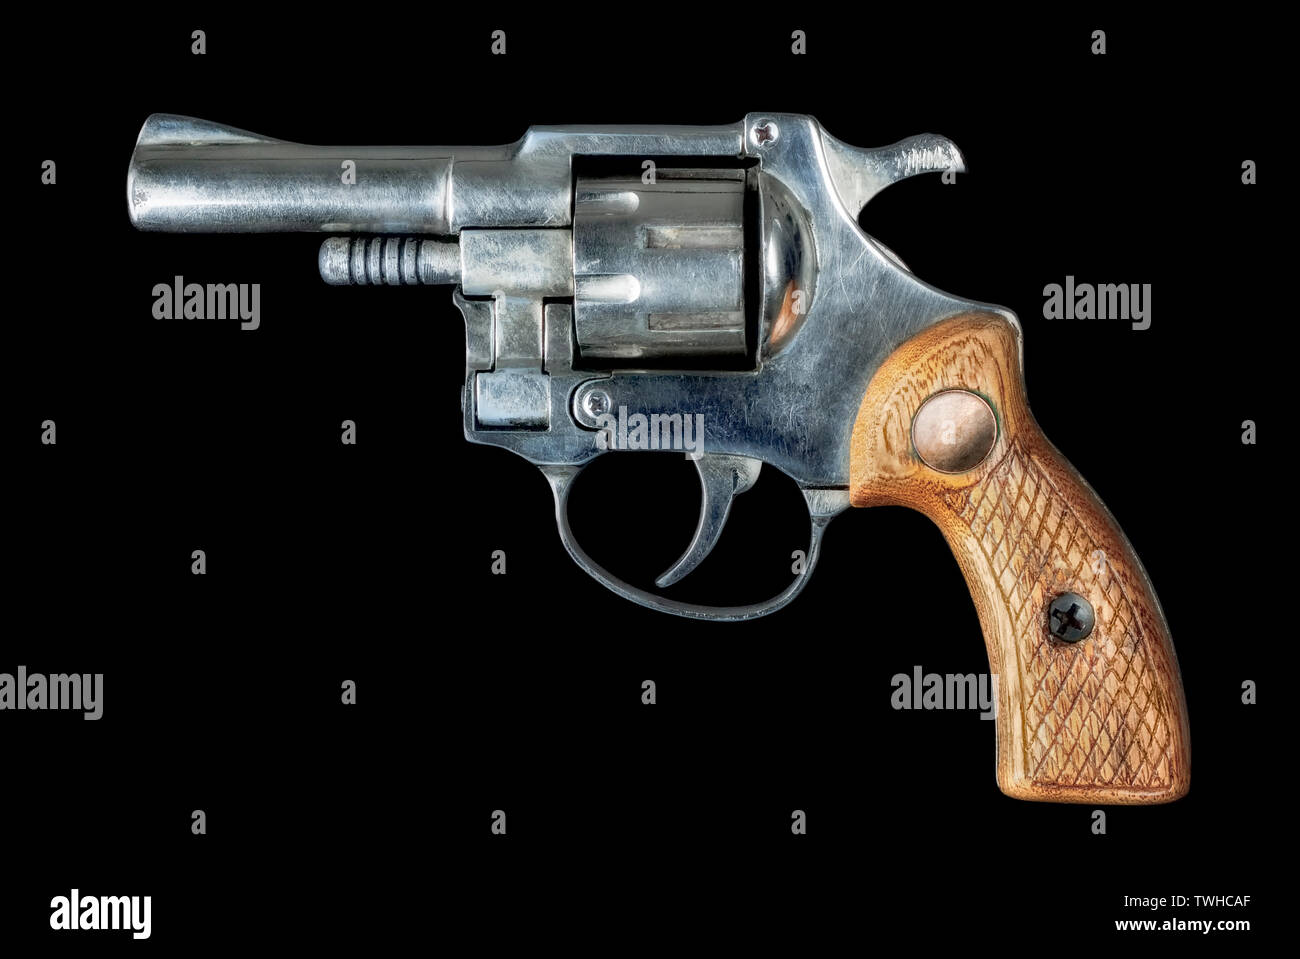 Image of an old revolver with a wood hilt on a black bakground Stock Photo